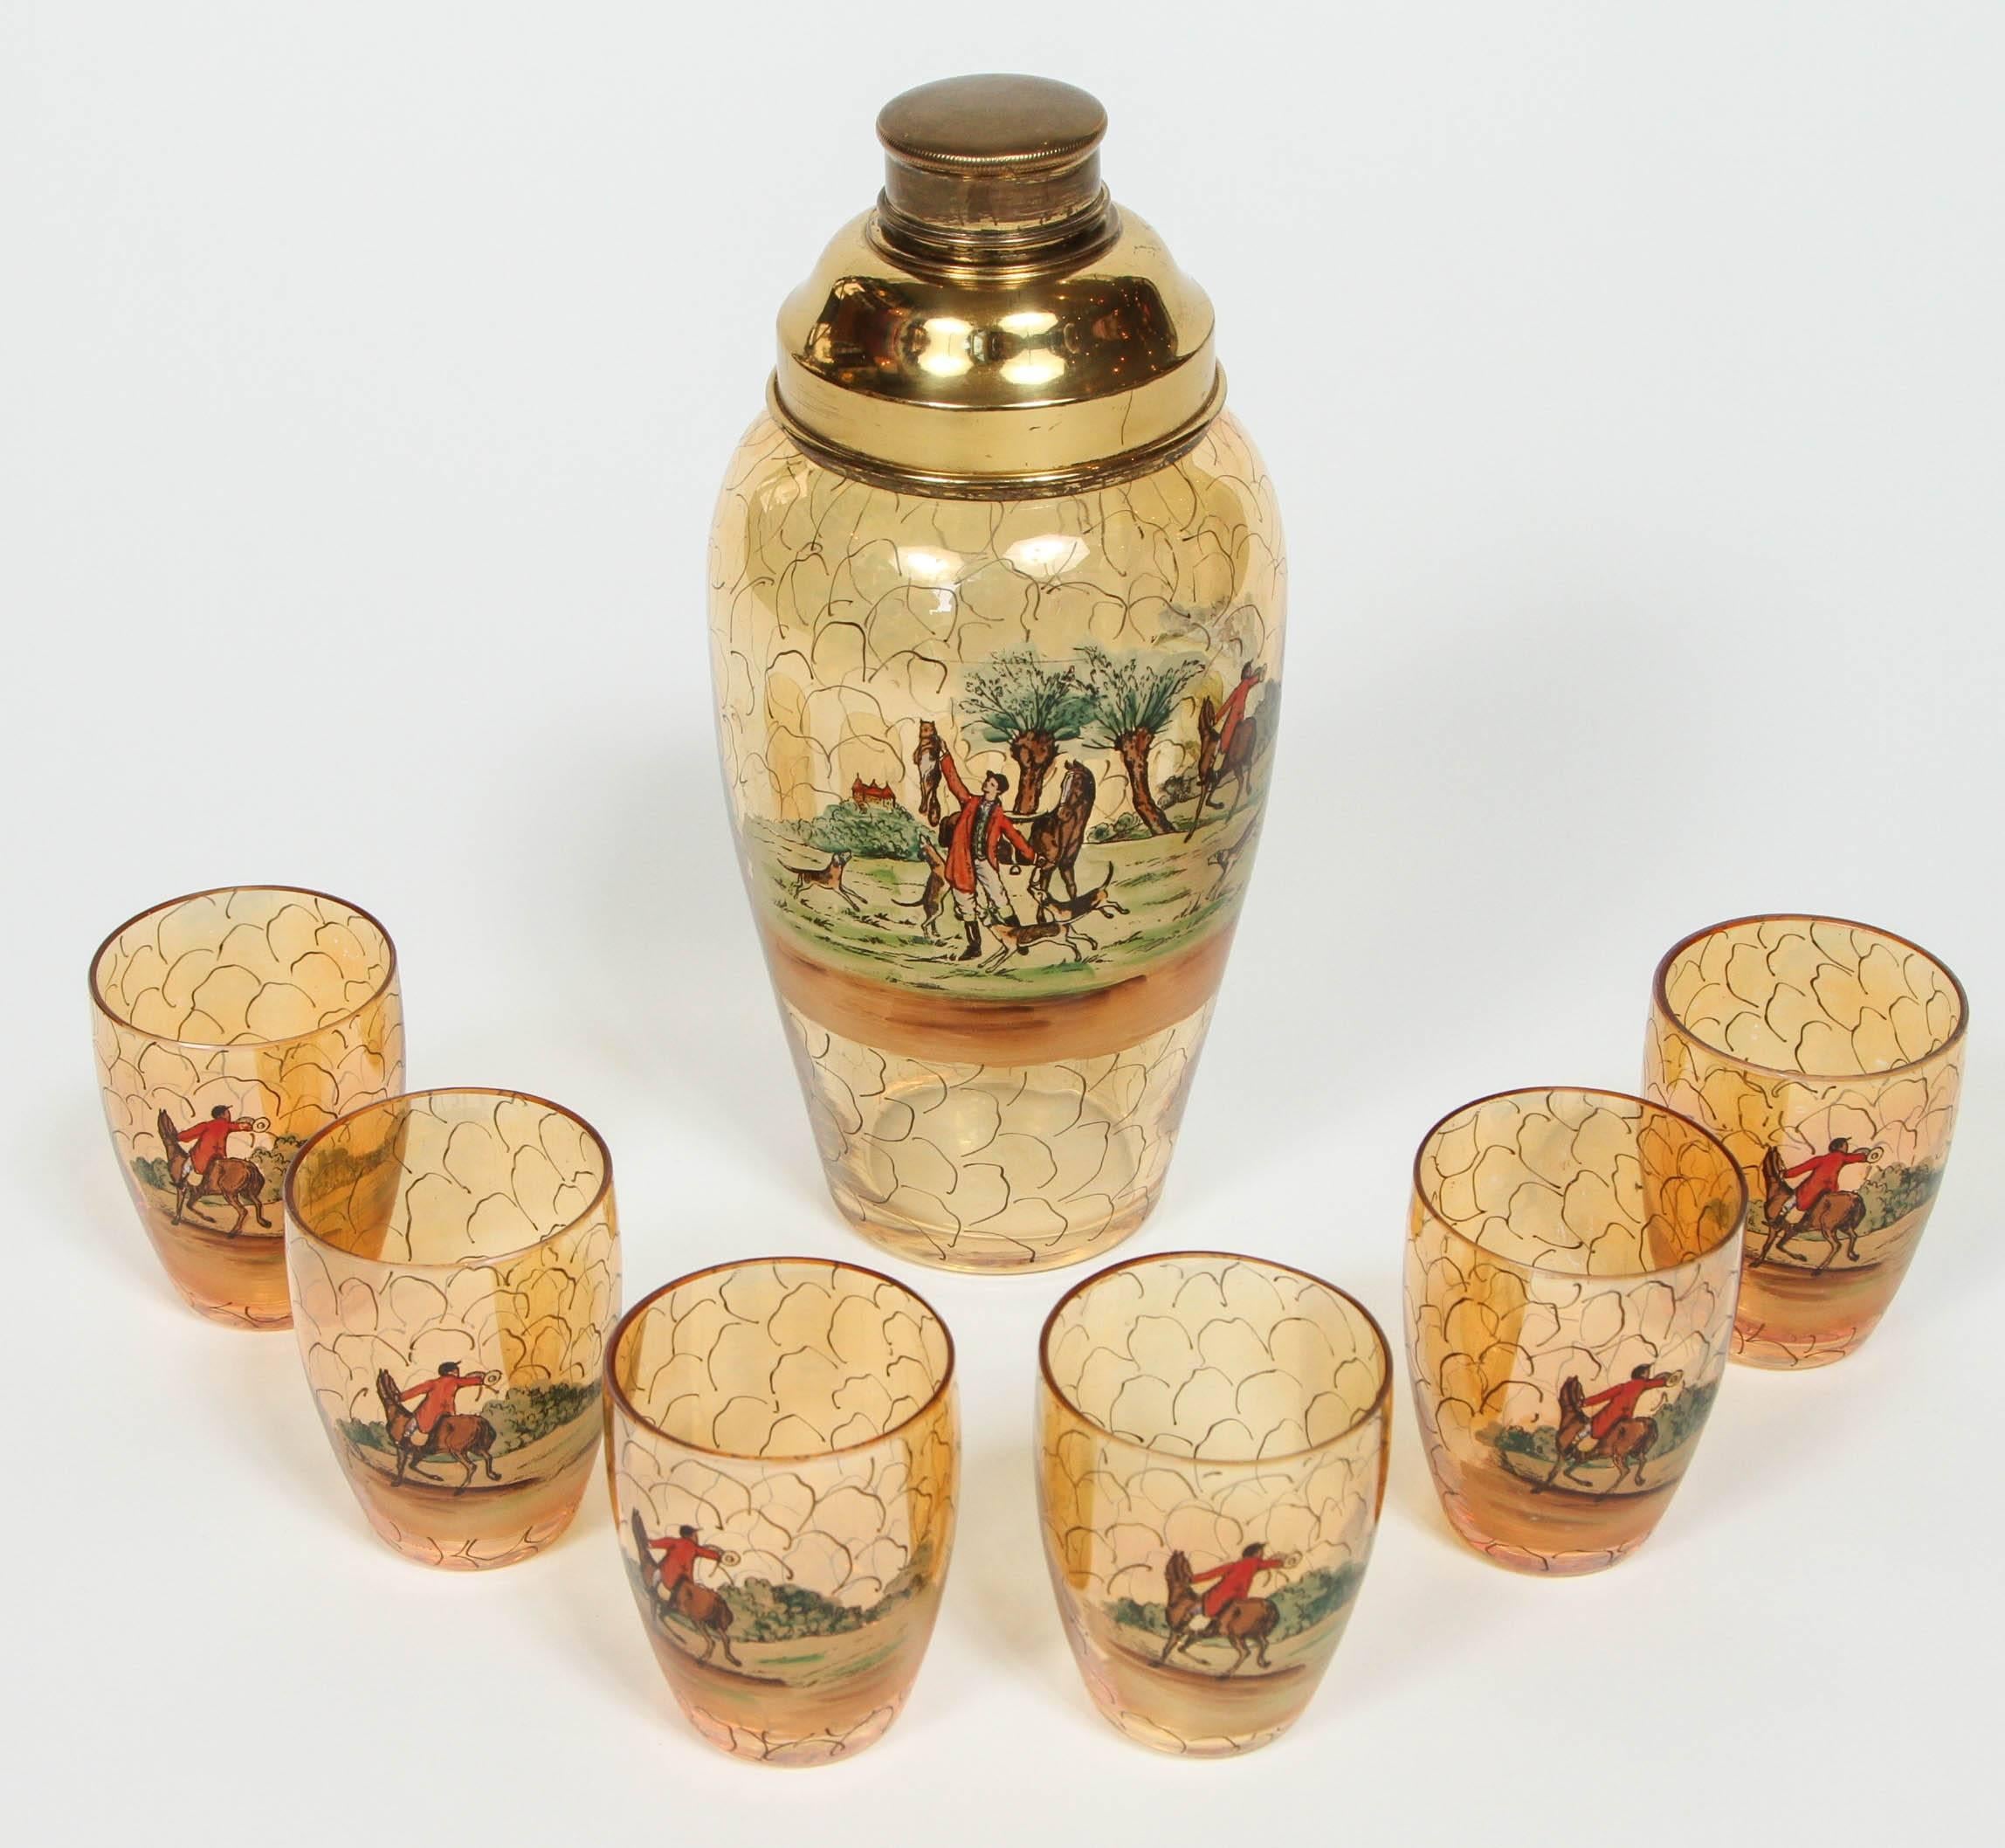 Antique martini shaker with brass top and six glasses. All pieces have a hunting scene design.